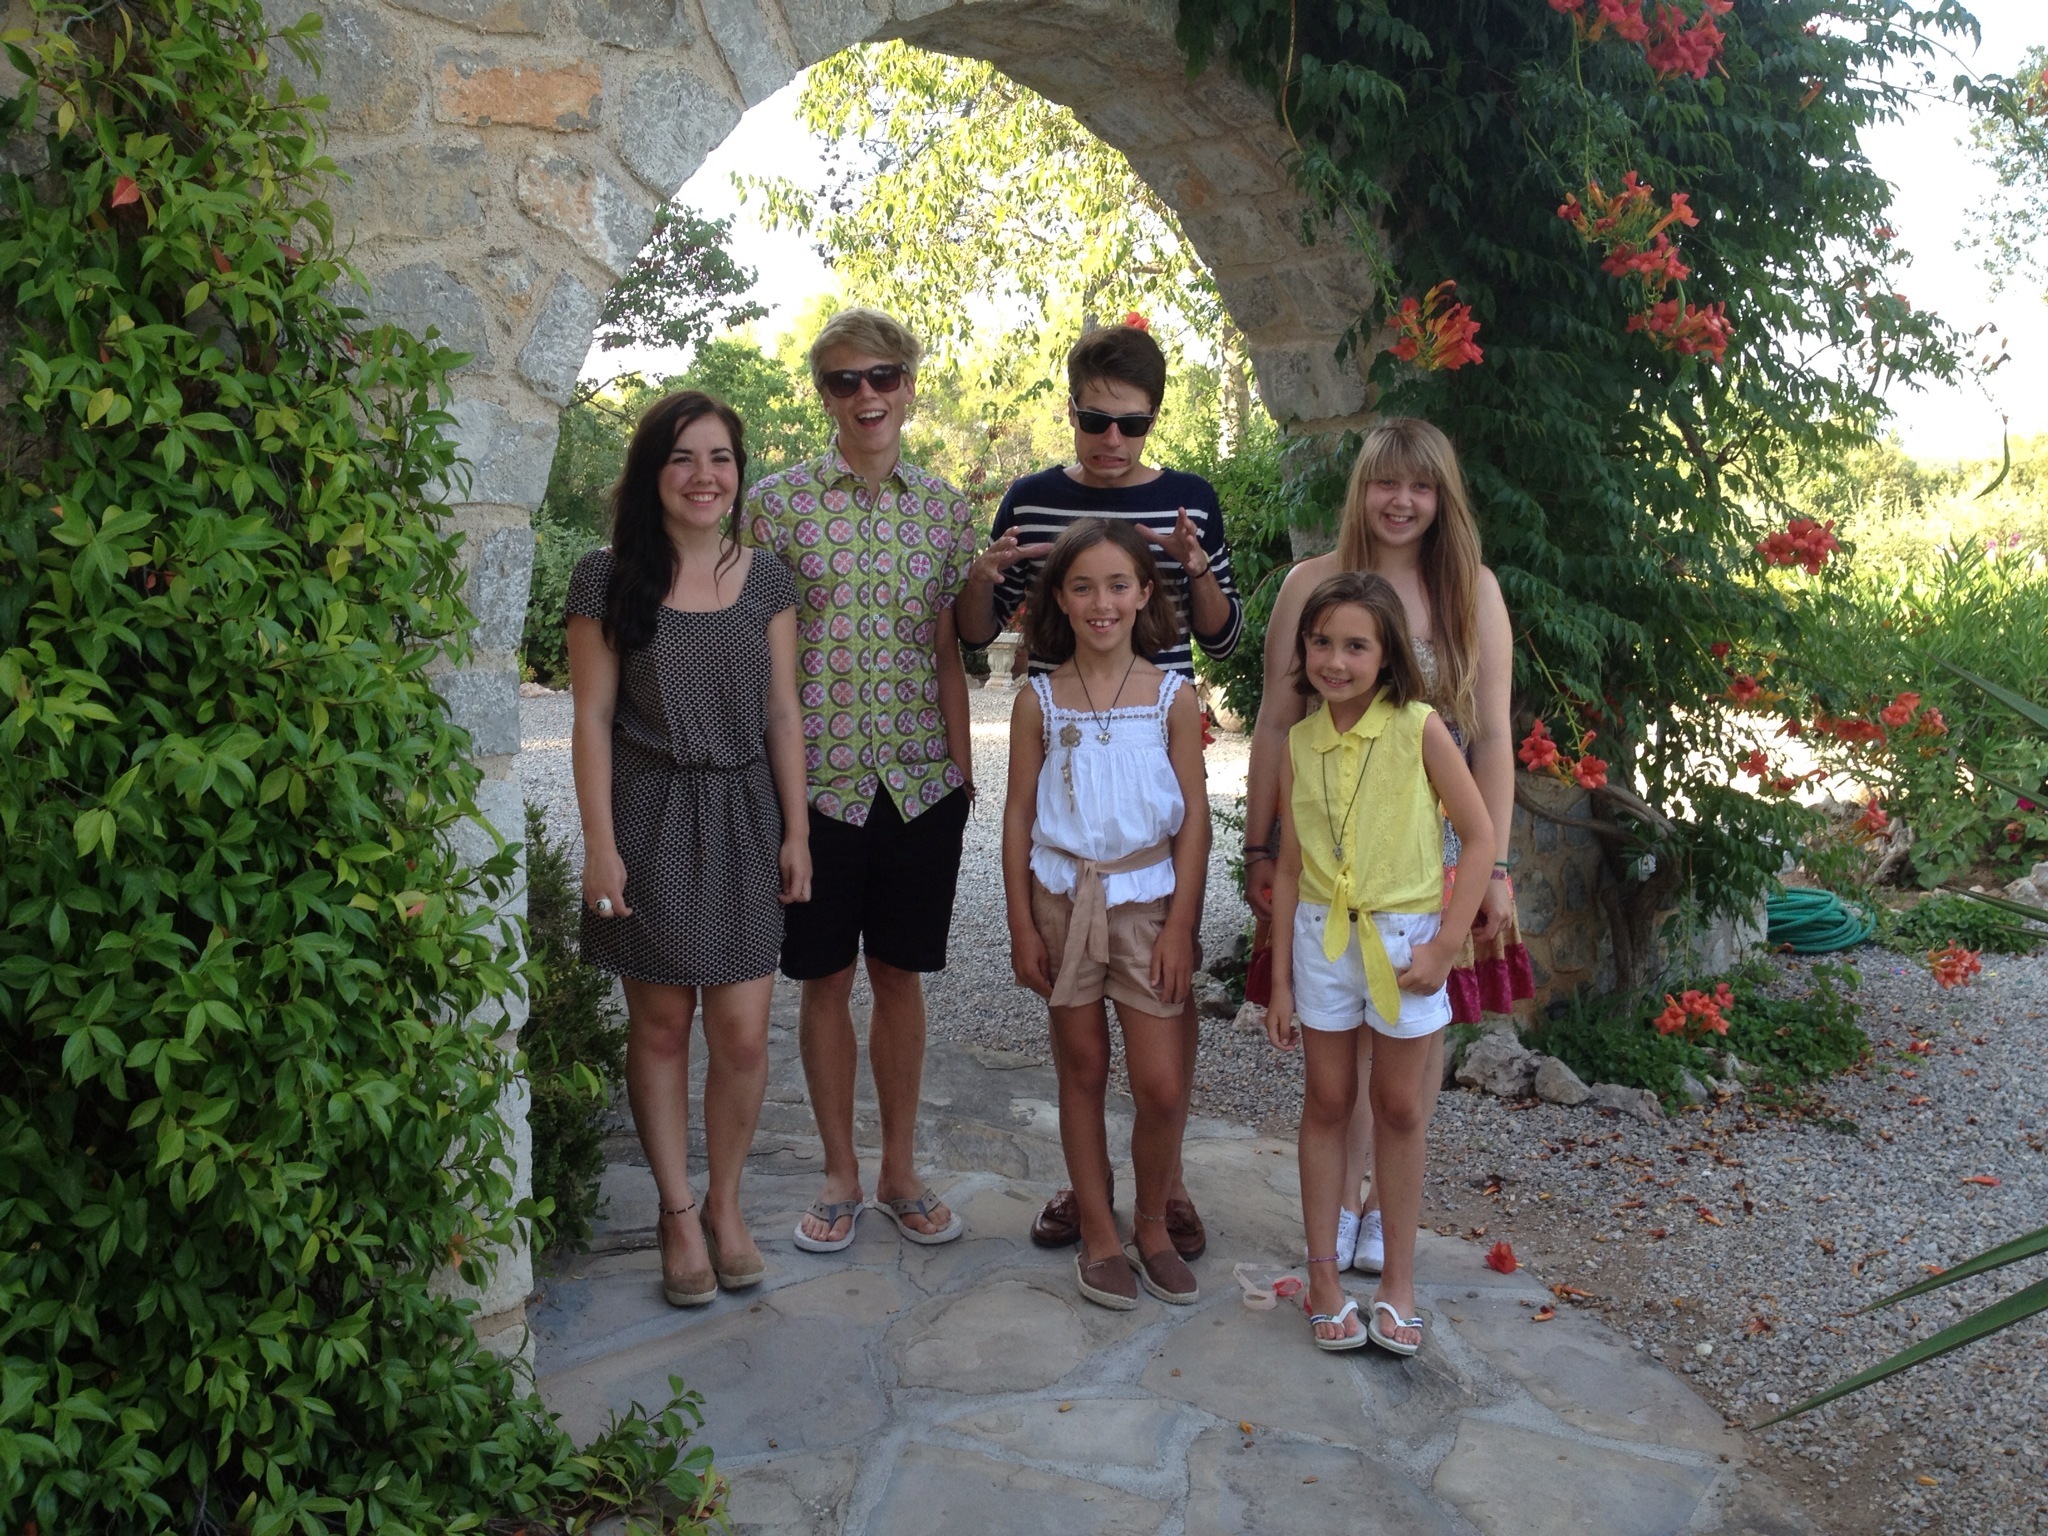 Two teenage boys in sunglasses and a teenage girl standing with three young girls, all smiling